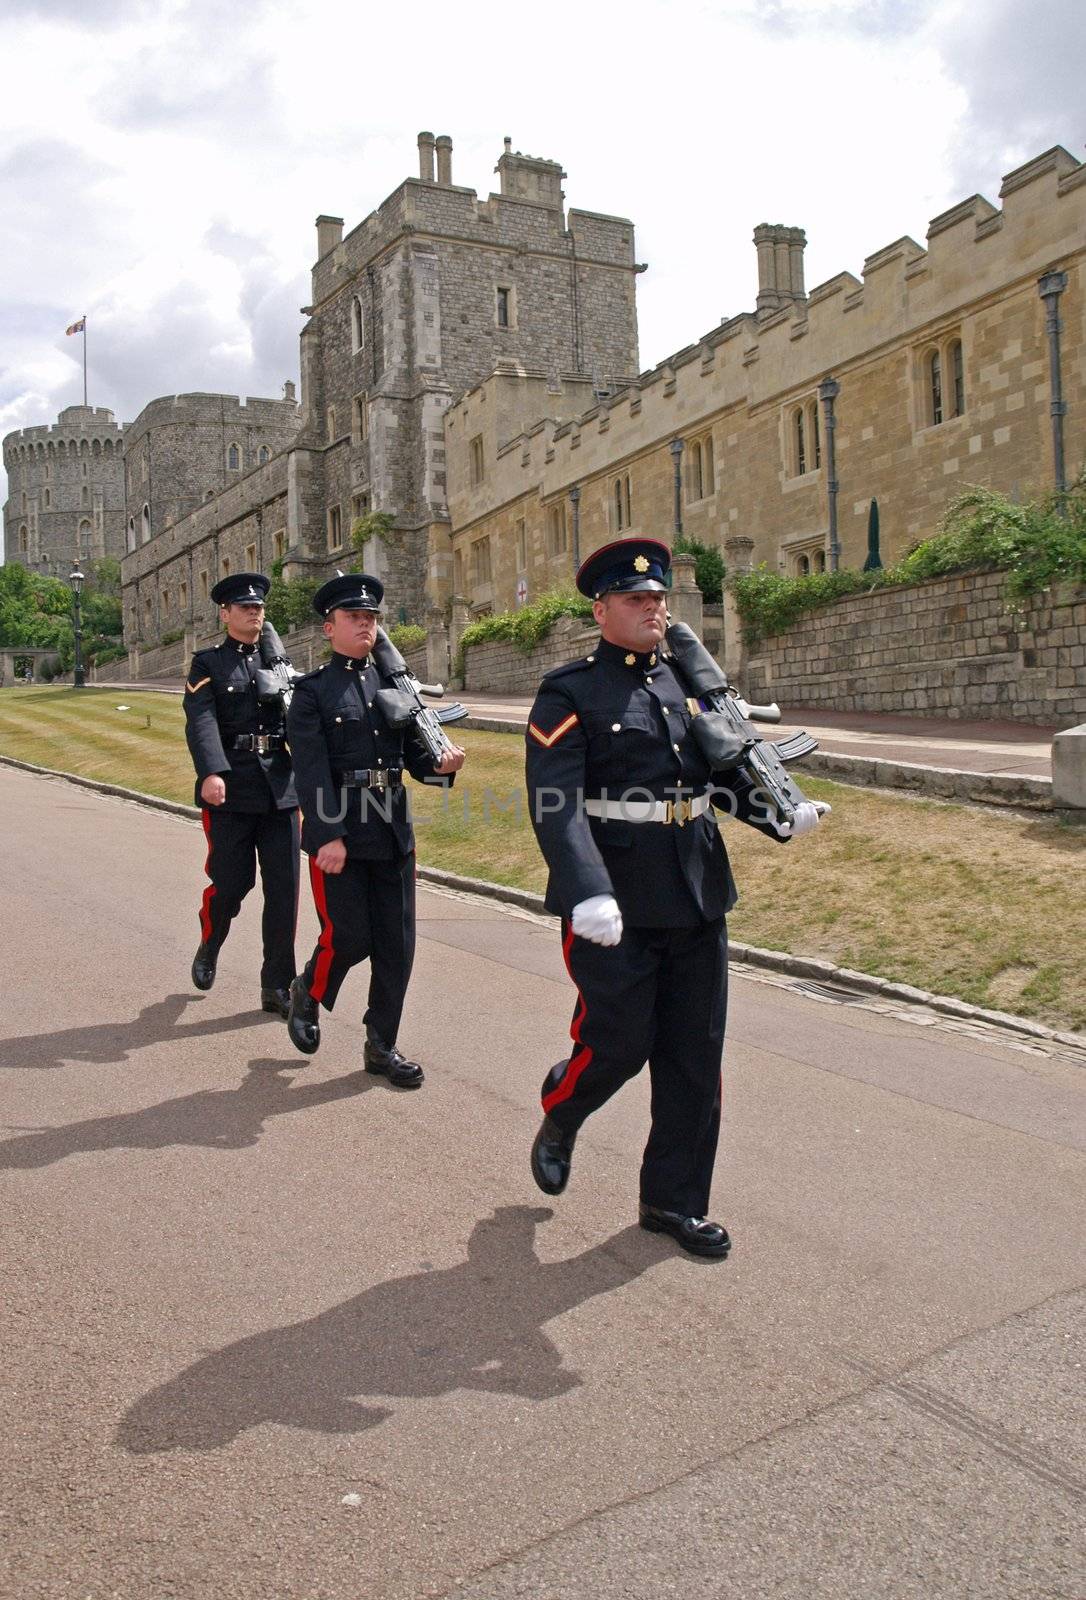 Marching Foot Guards at the changing of guards at Windsor Castle, the largest inhabited castle in the world. The Foot Guards are the infantry regiments of the British Army.